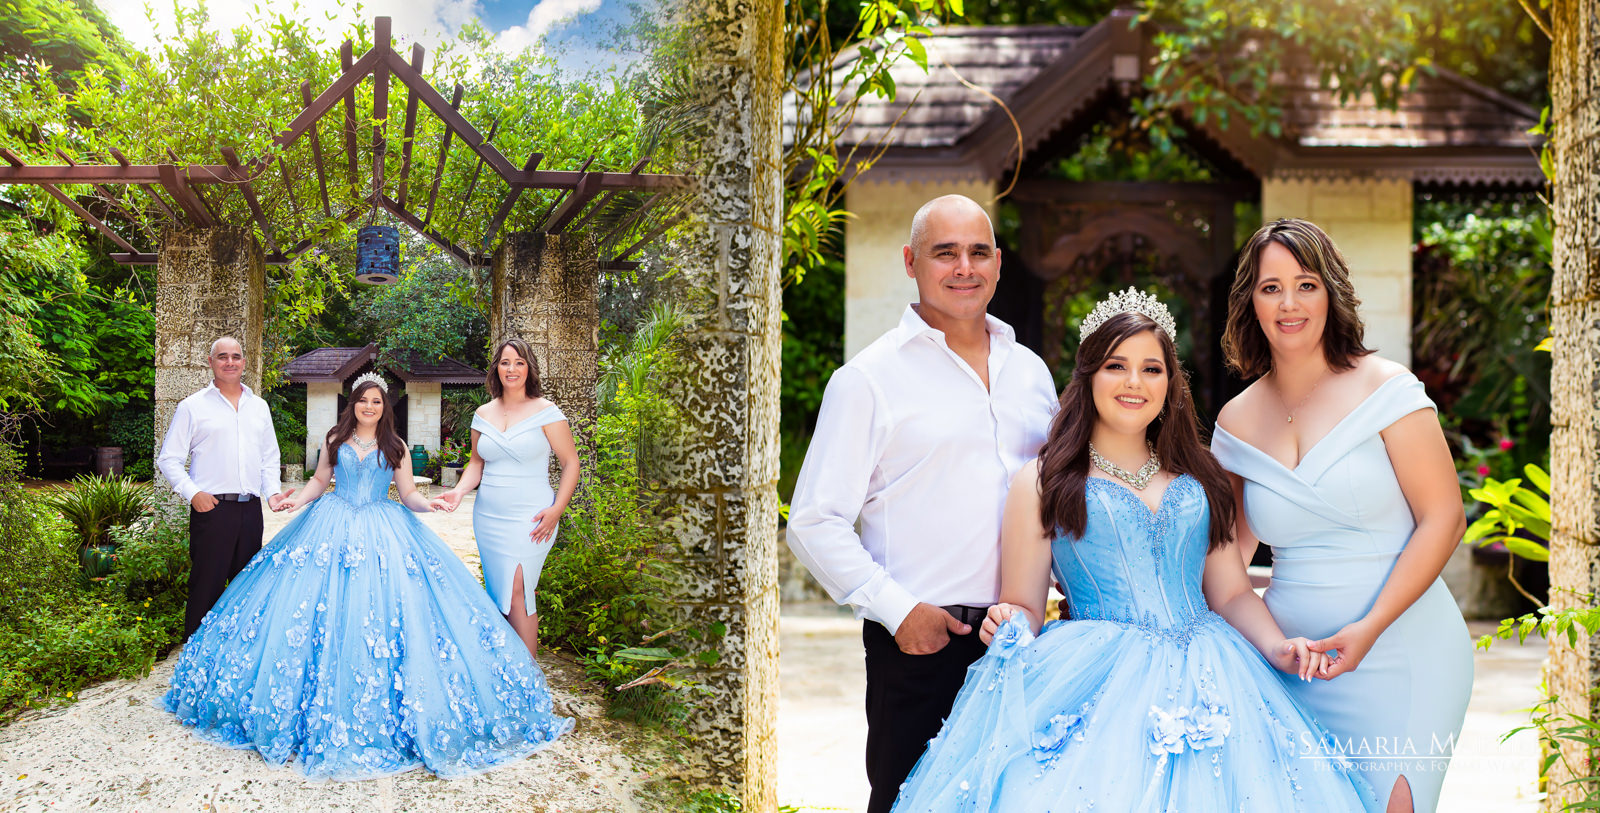 Photoshoot with family, photo quinceanera with blue dress, best quinceanera pictures, quinceanera in Florida, Samaria Martin photography